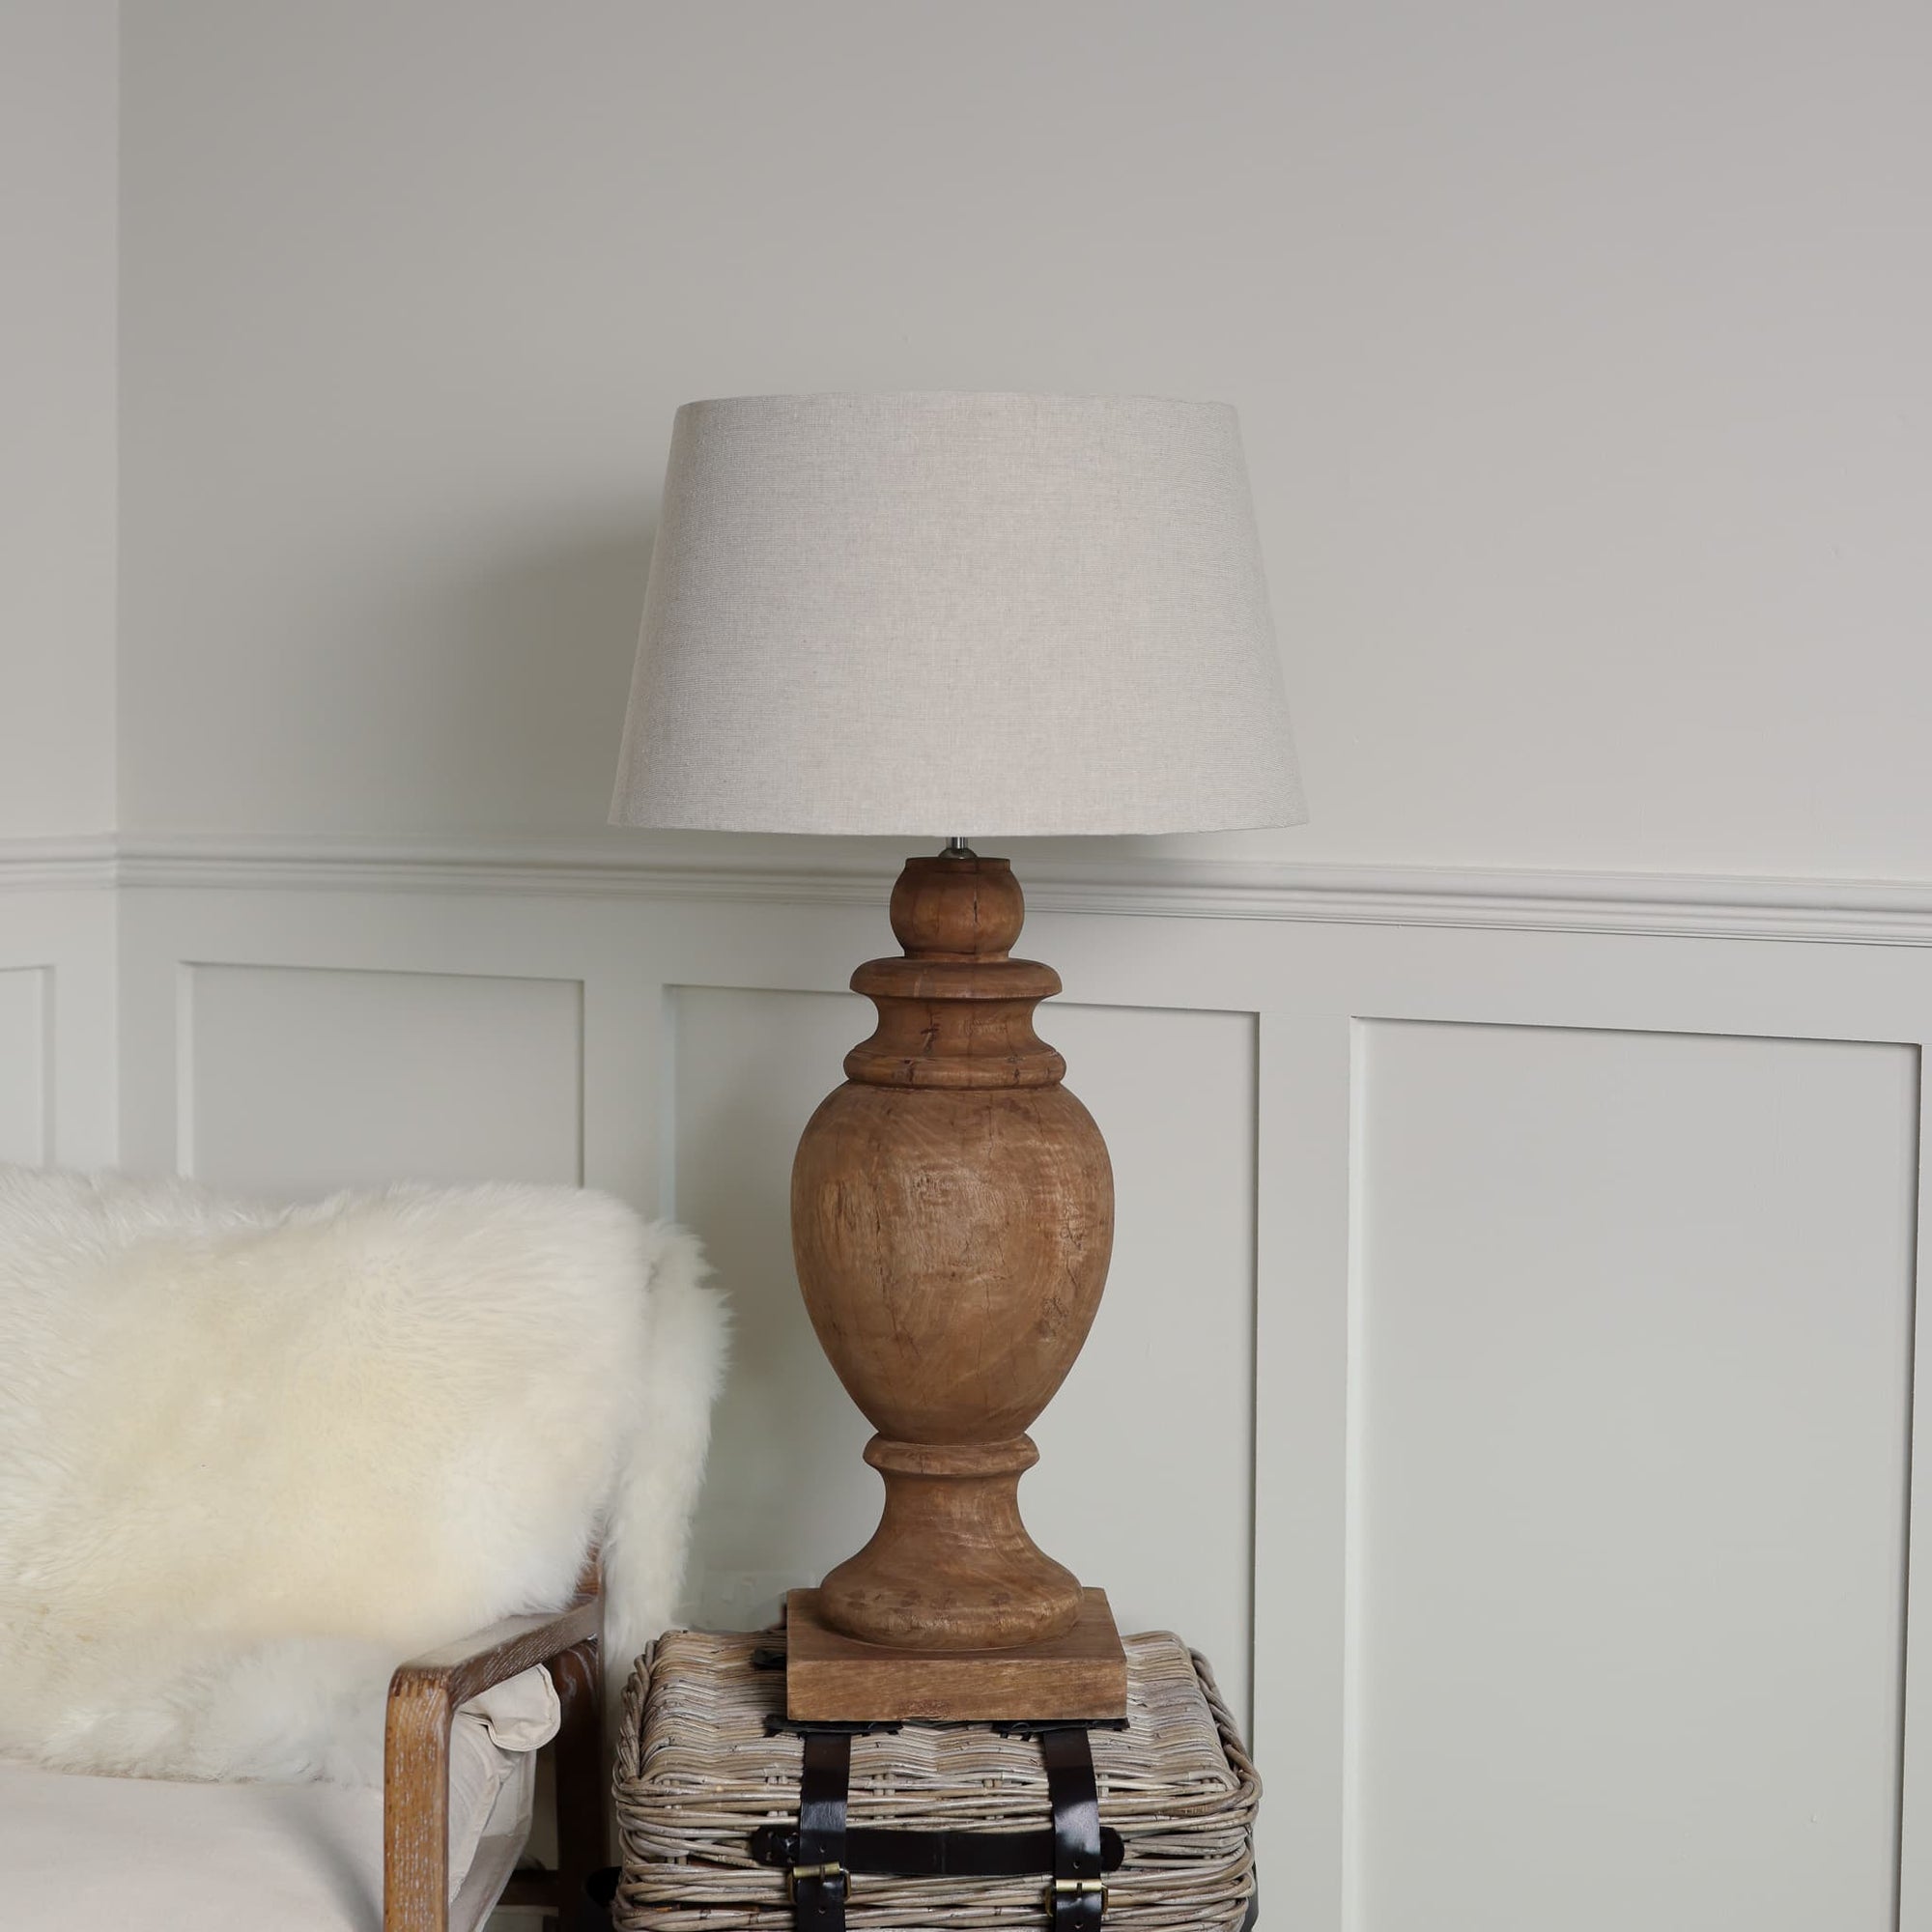 Tall wooden table lamp lit with neutral shade on side table.